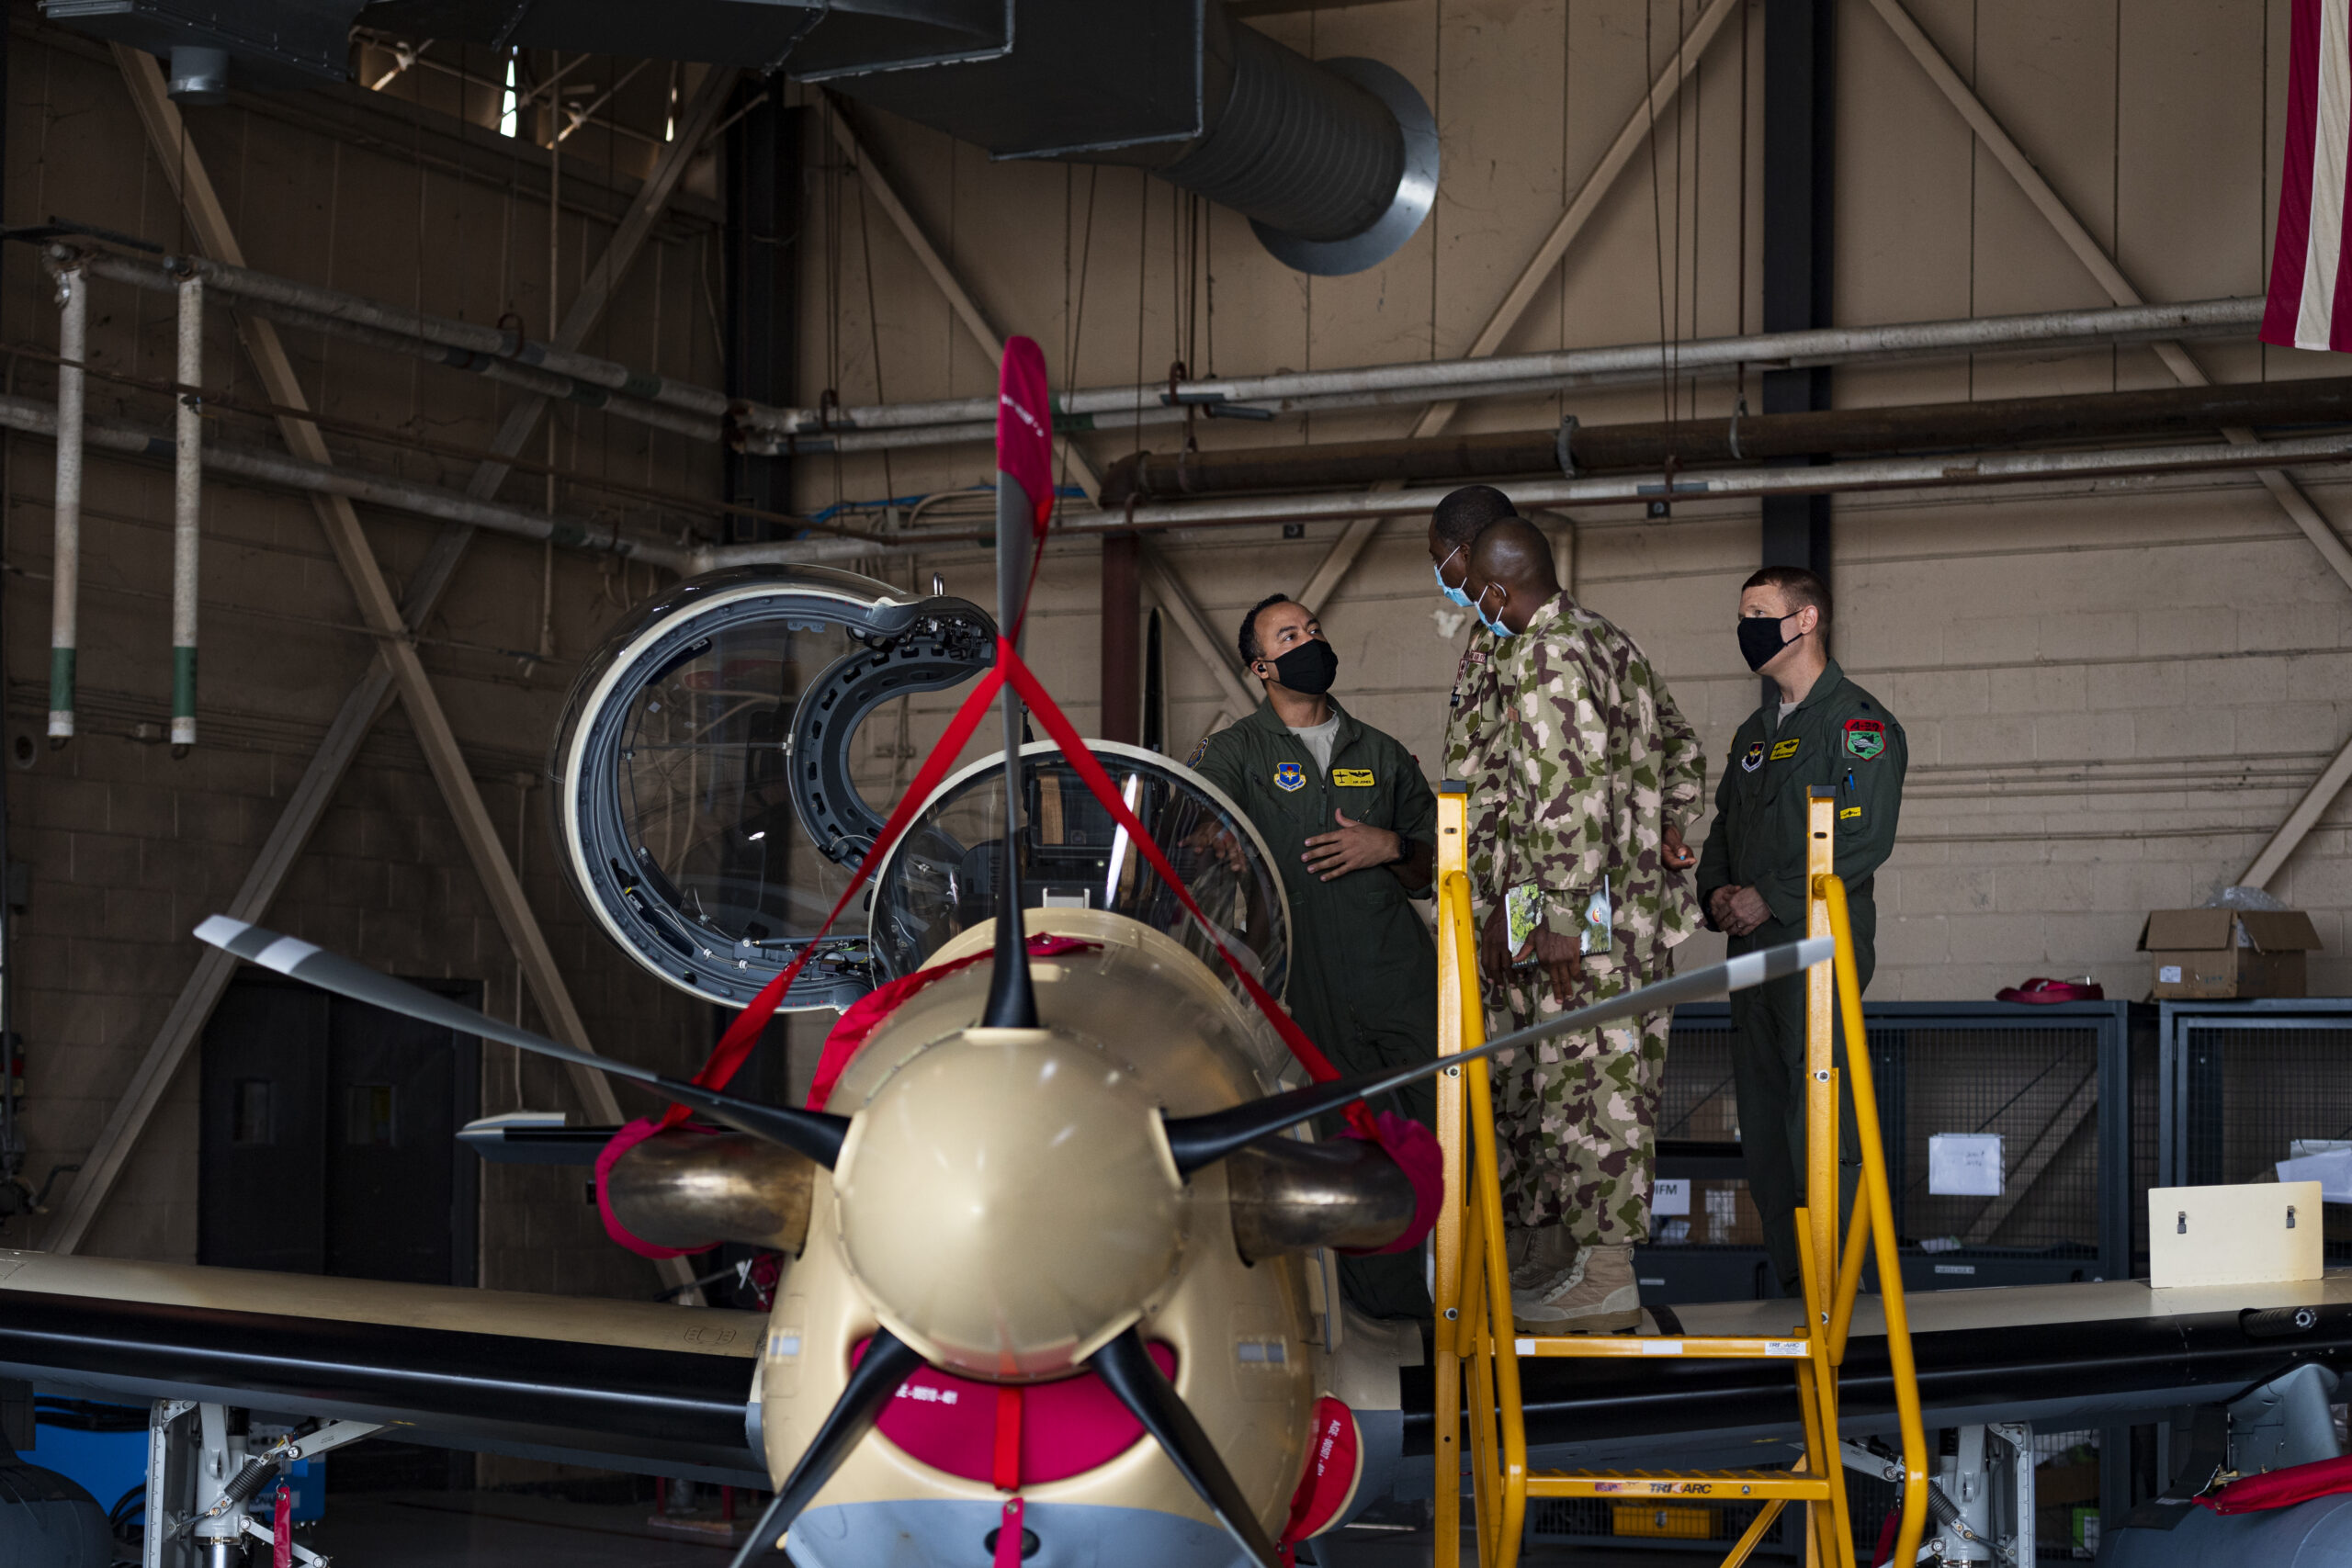 U.S. Air Force Lt. Col. Aaron Jones, left, 81st Fighter Squadron director of operations, explains the operation of an A-29 Super Tucano to Nigerian Air Force Air Vice Marshall Sule Lawal and NAF Group Captain Abdullahi Abu, Nigerian A-29 program foreign liaison officers, Oct. 6, 2020, at Moody Air Force Base, Georgia. The 81st FS conducts combat training for NAF pilots and maintainers in the A-29 Super Tucano. Foreign liaison officers with the NAF, along with representatives of the Air Force Life Cycle Management Center, Air Force International Affairs, the Air Force Security Assistance and Training Squadron, and the Nigerian A-29 program, visited the 81st FS to discuss the future of the program and meet with students. (U.S. Air Force photo by Senior Airman Hayden Legg)